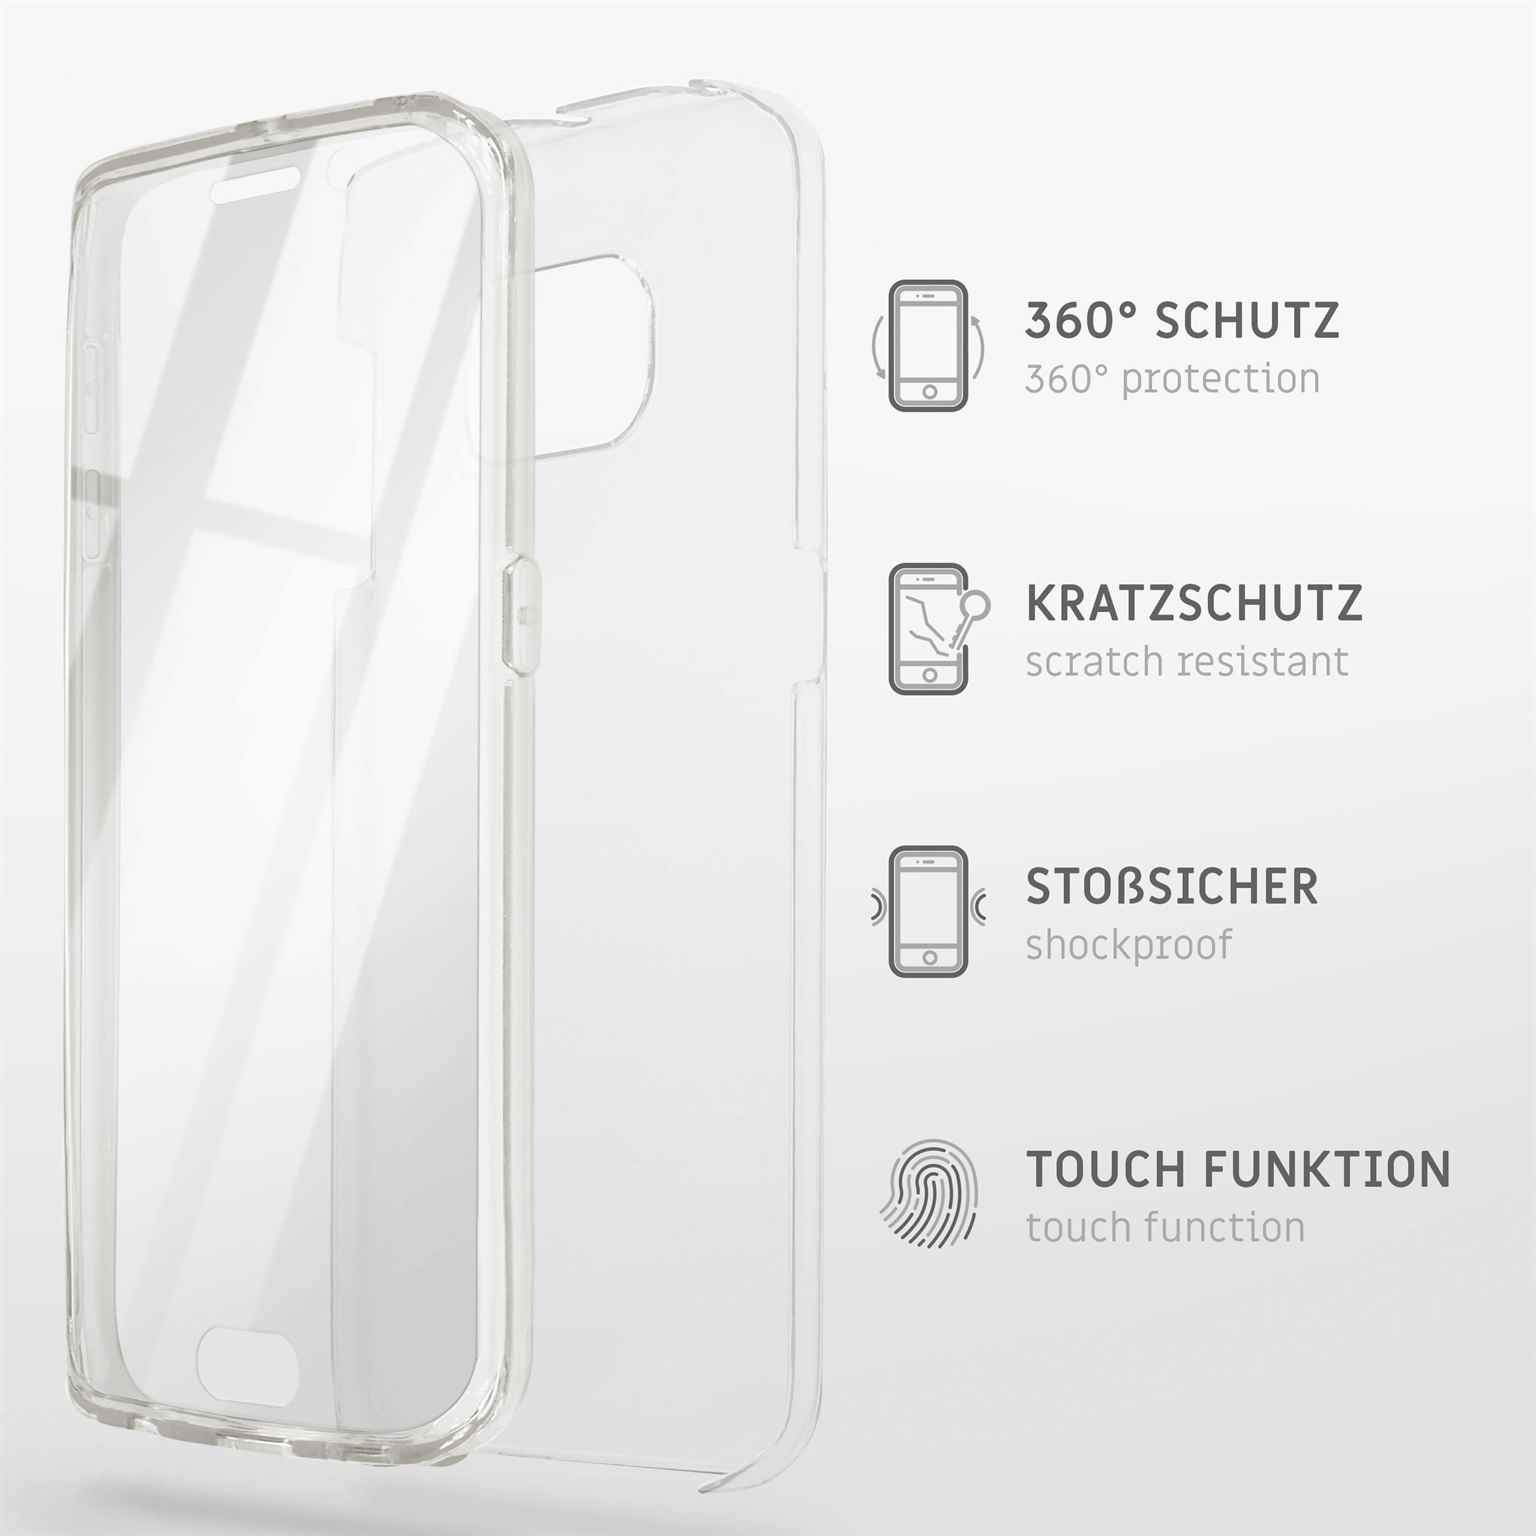 Full ONEFLOW Case, Samsung, S20 Ultra-Clear Plus Galaxy / 5G, Touch Cover,